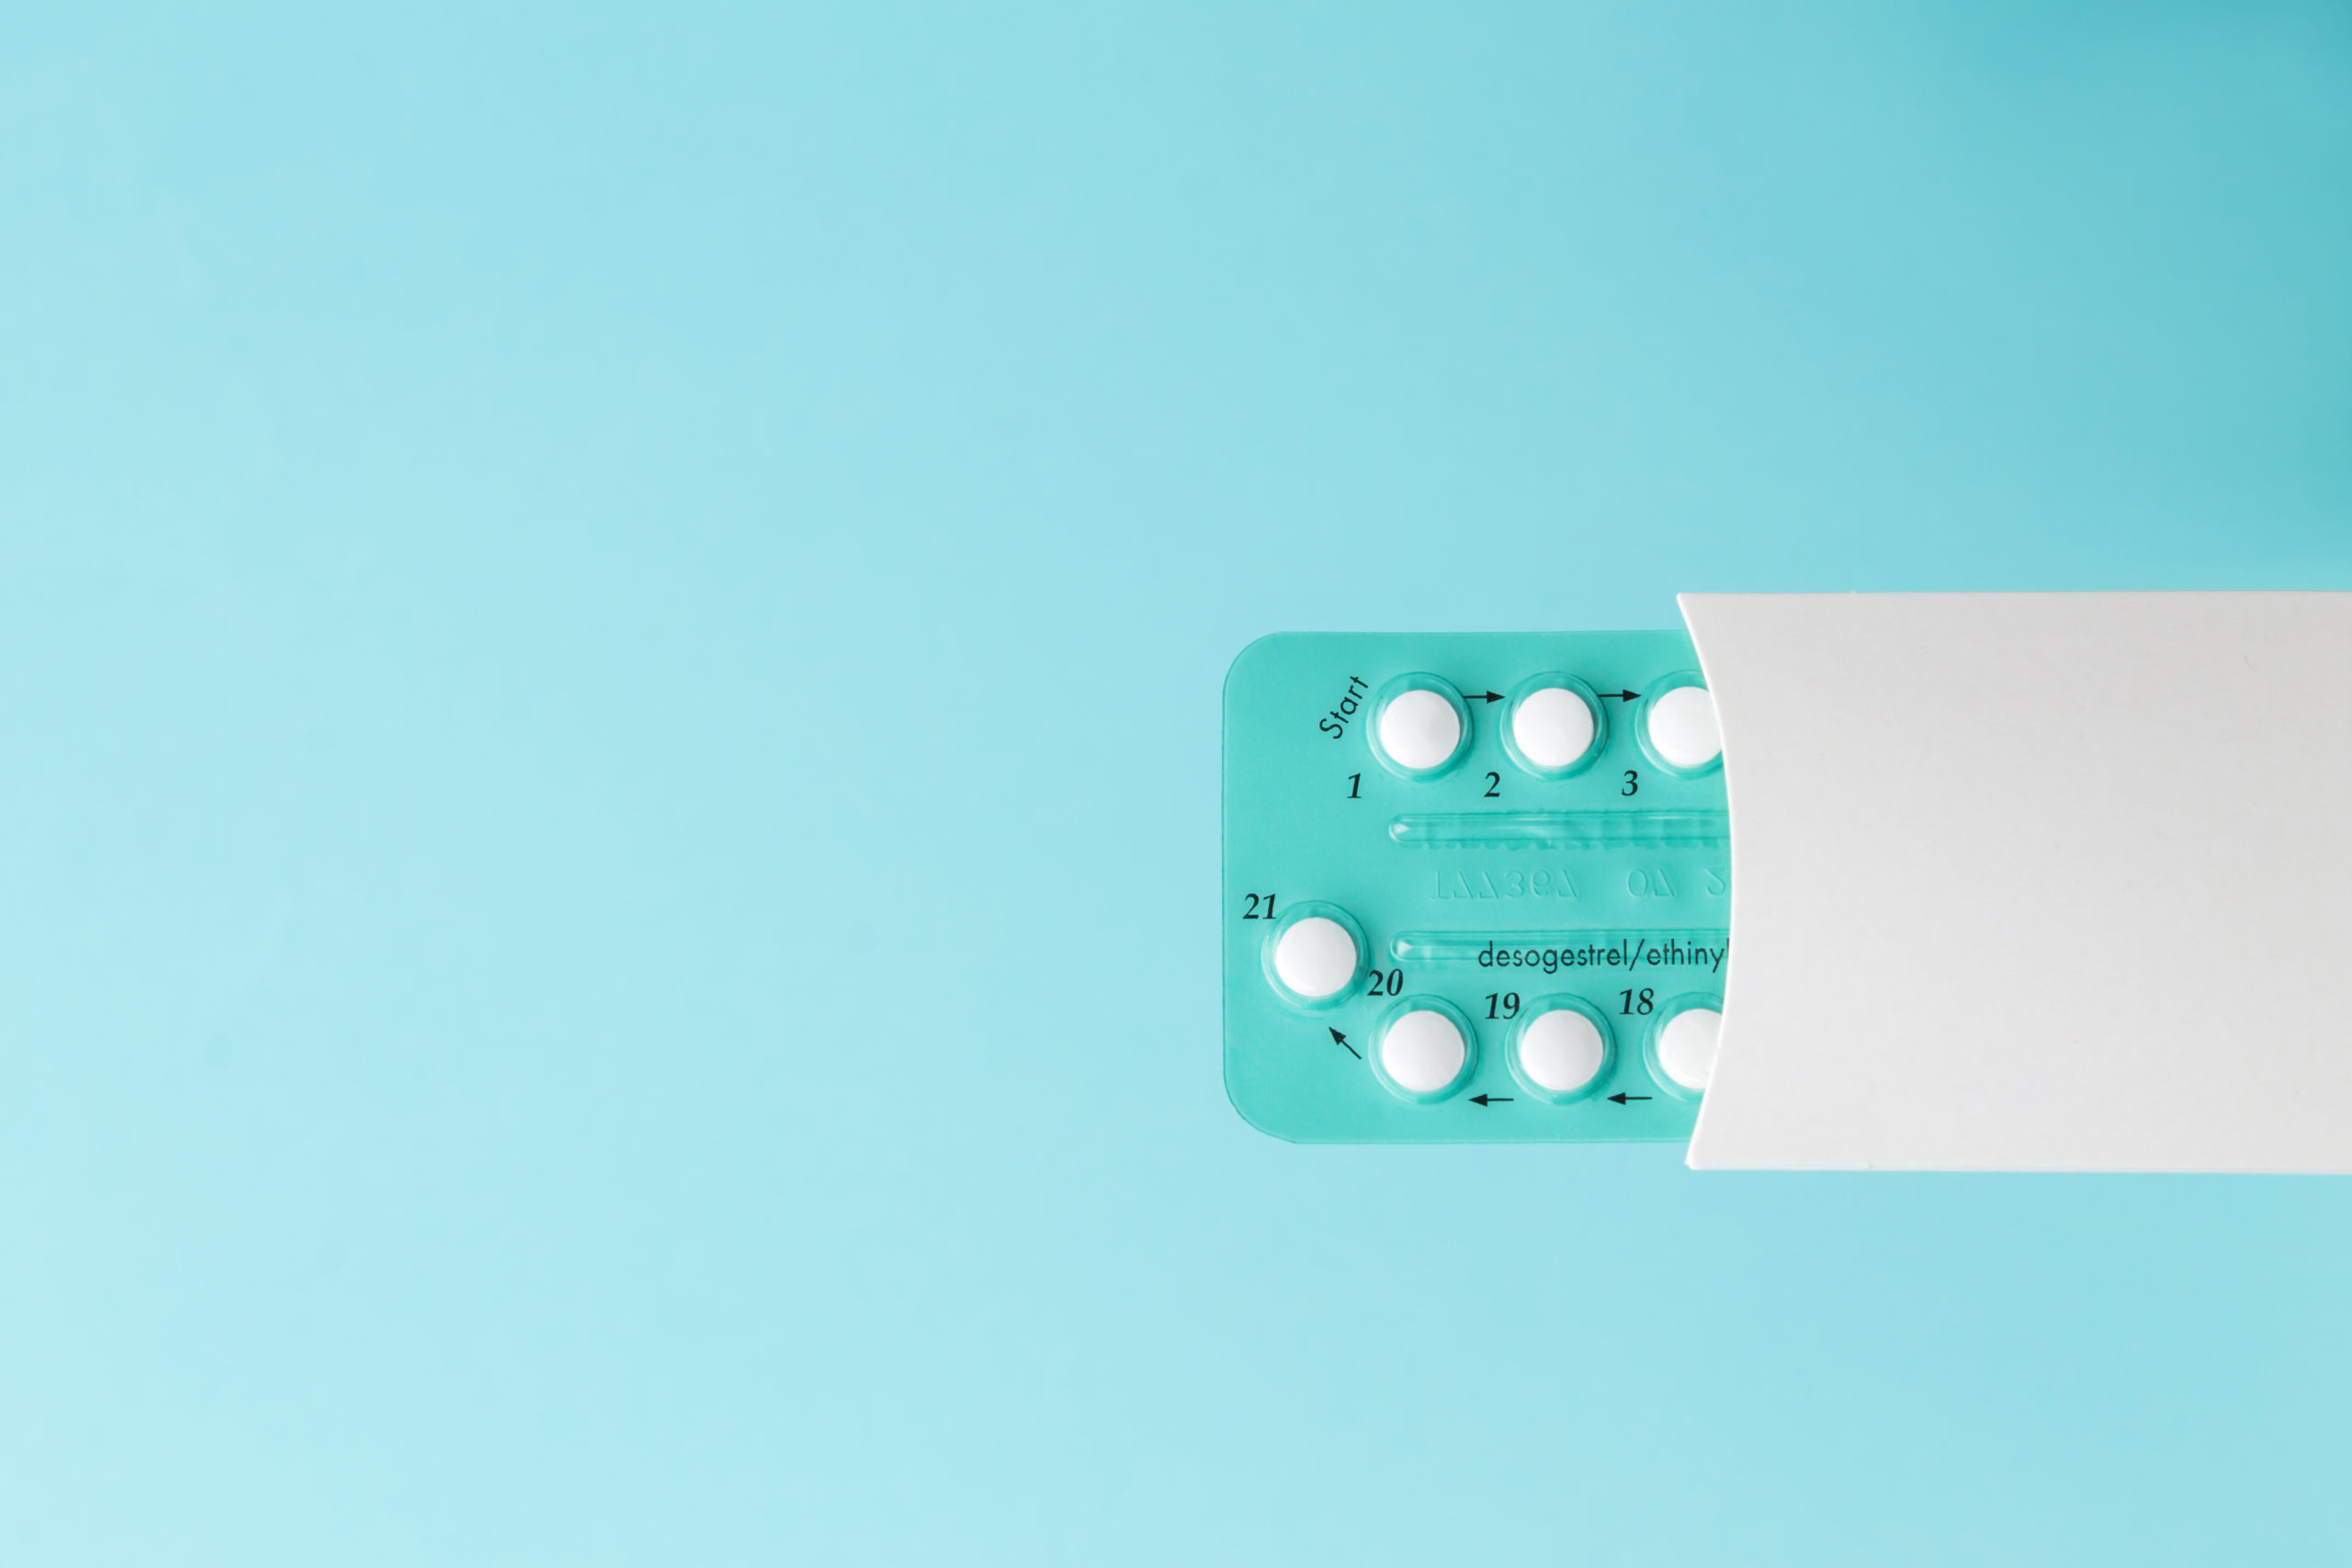 Pack of oral contraceptive pills with instructions. Blister in white case on blue background